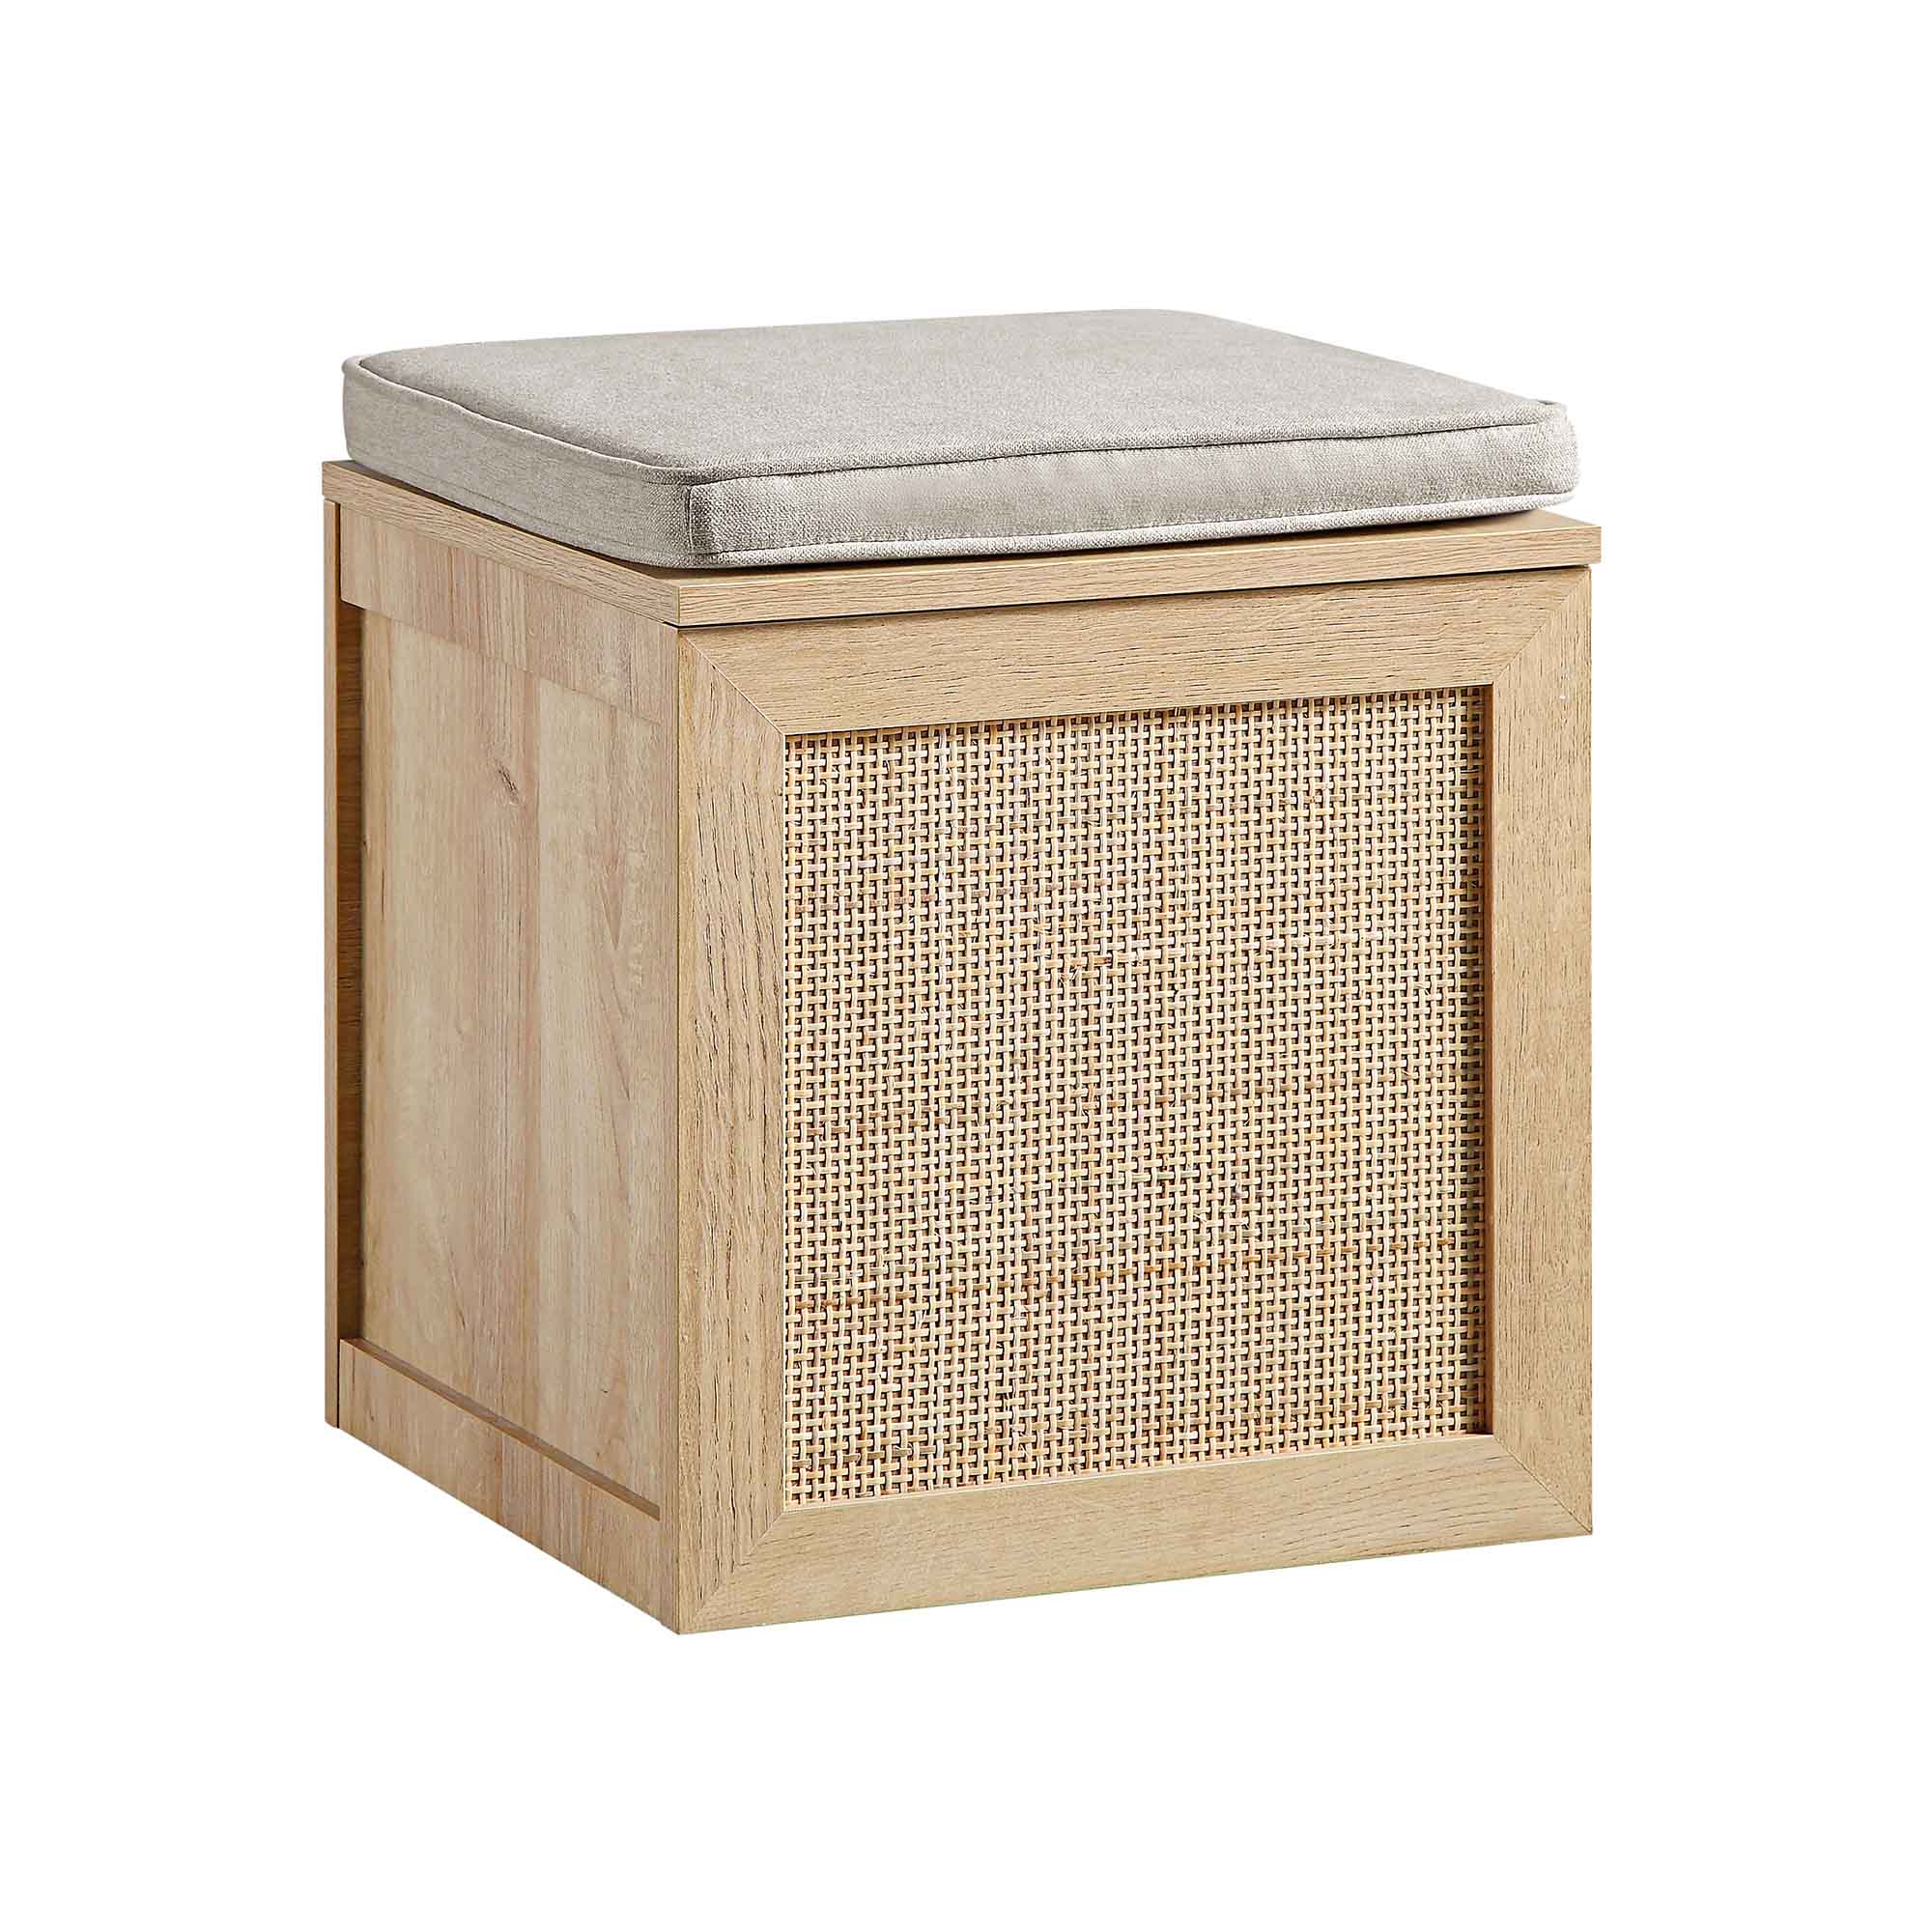 Frances Woven Rattan Single Storage Stool with Cushion, Natural